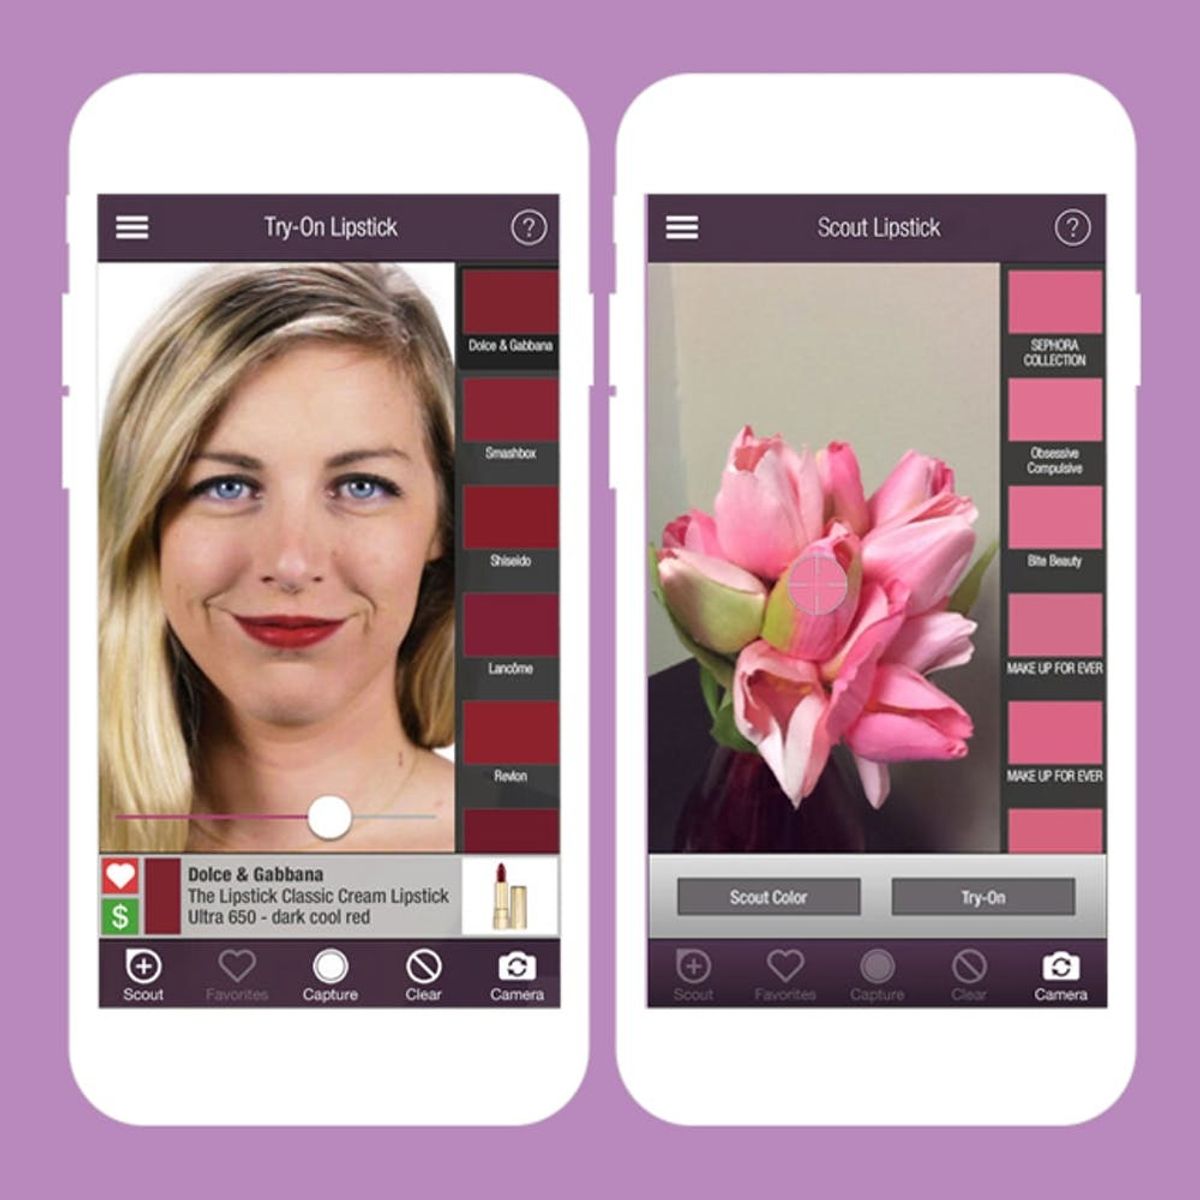 5 Best Apps of the Week: An App That Finds Your New Favorite Makeup + More